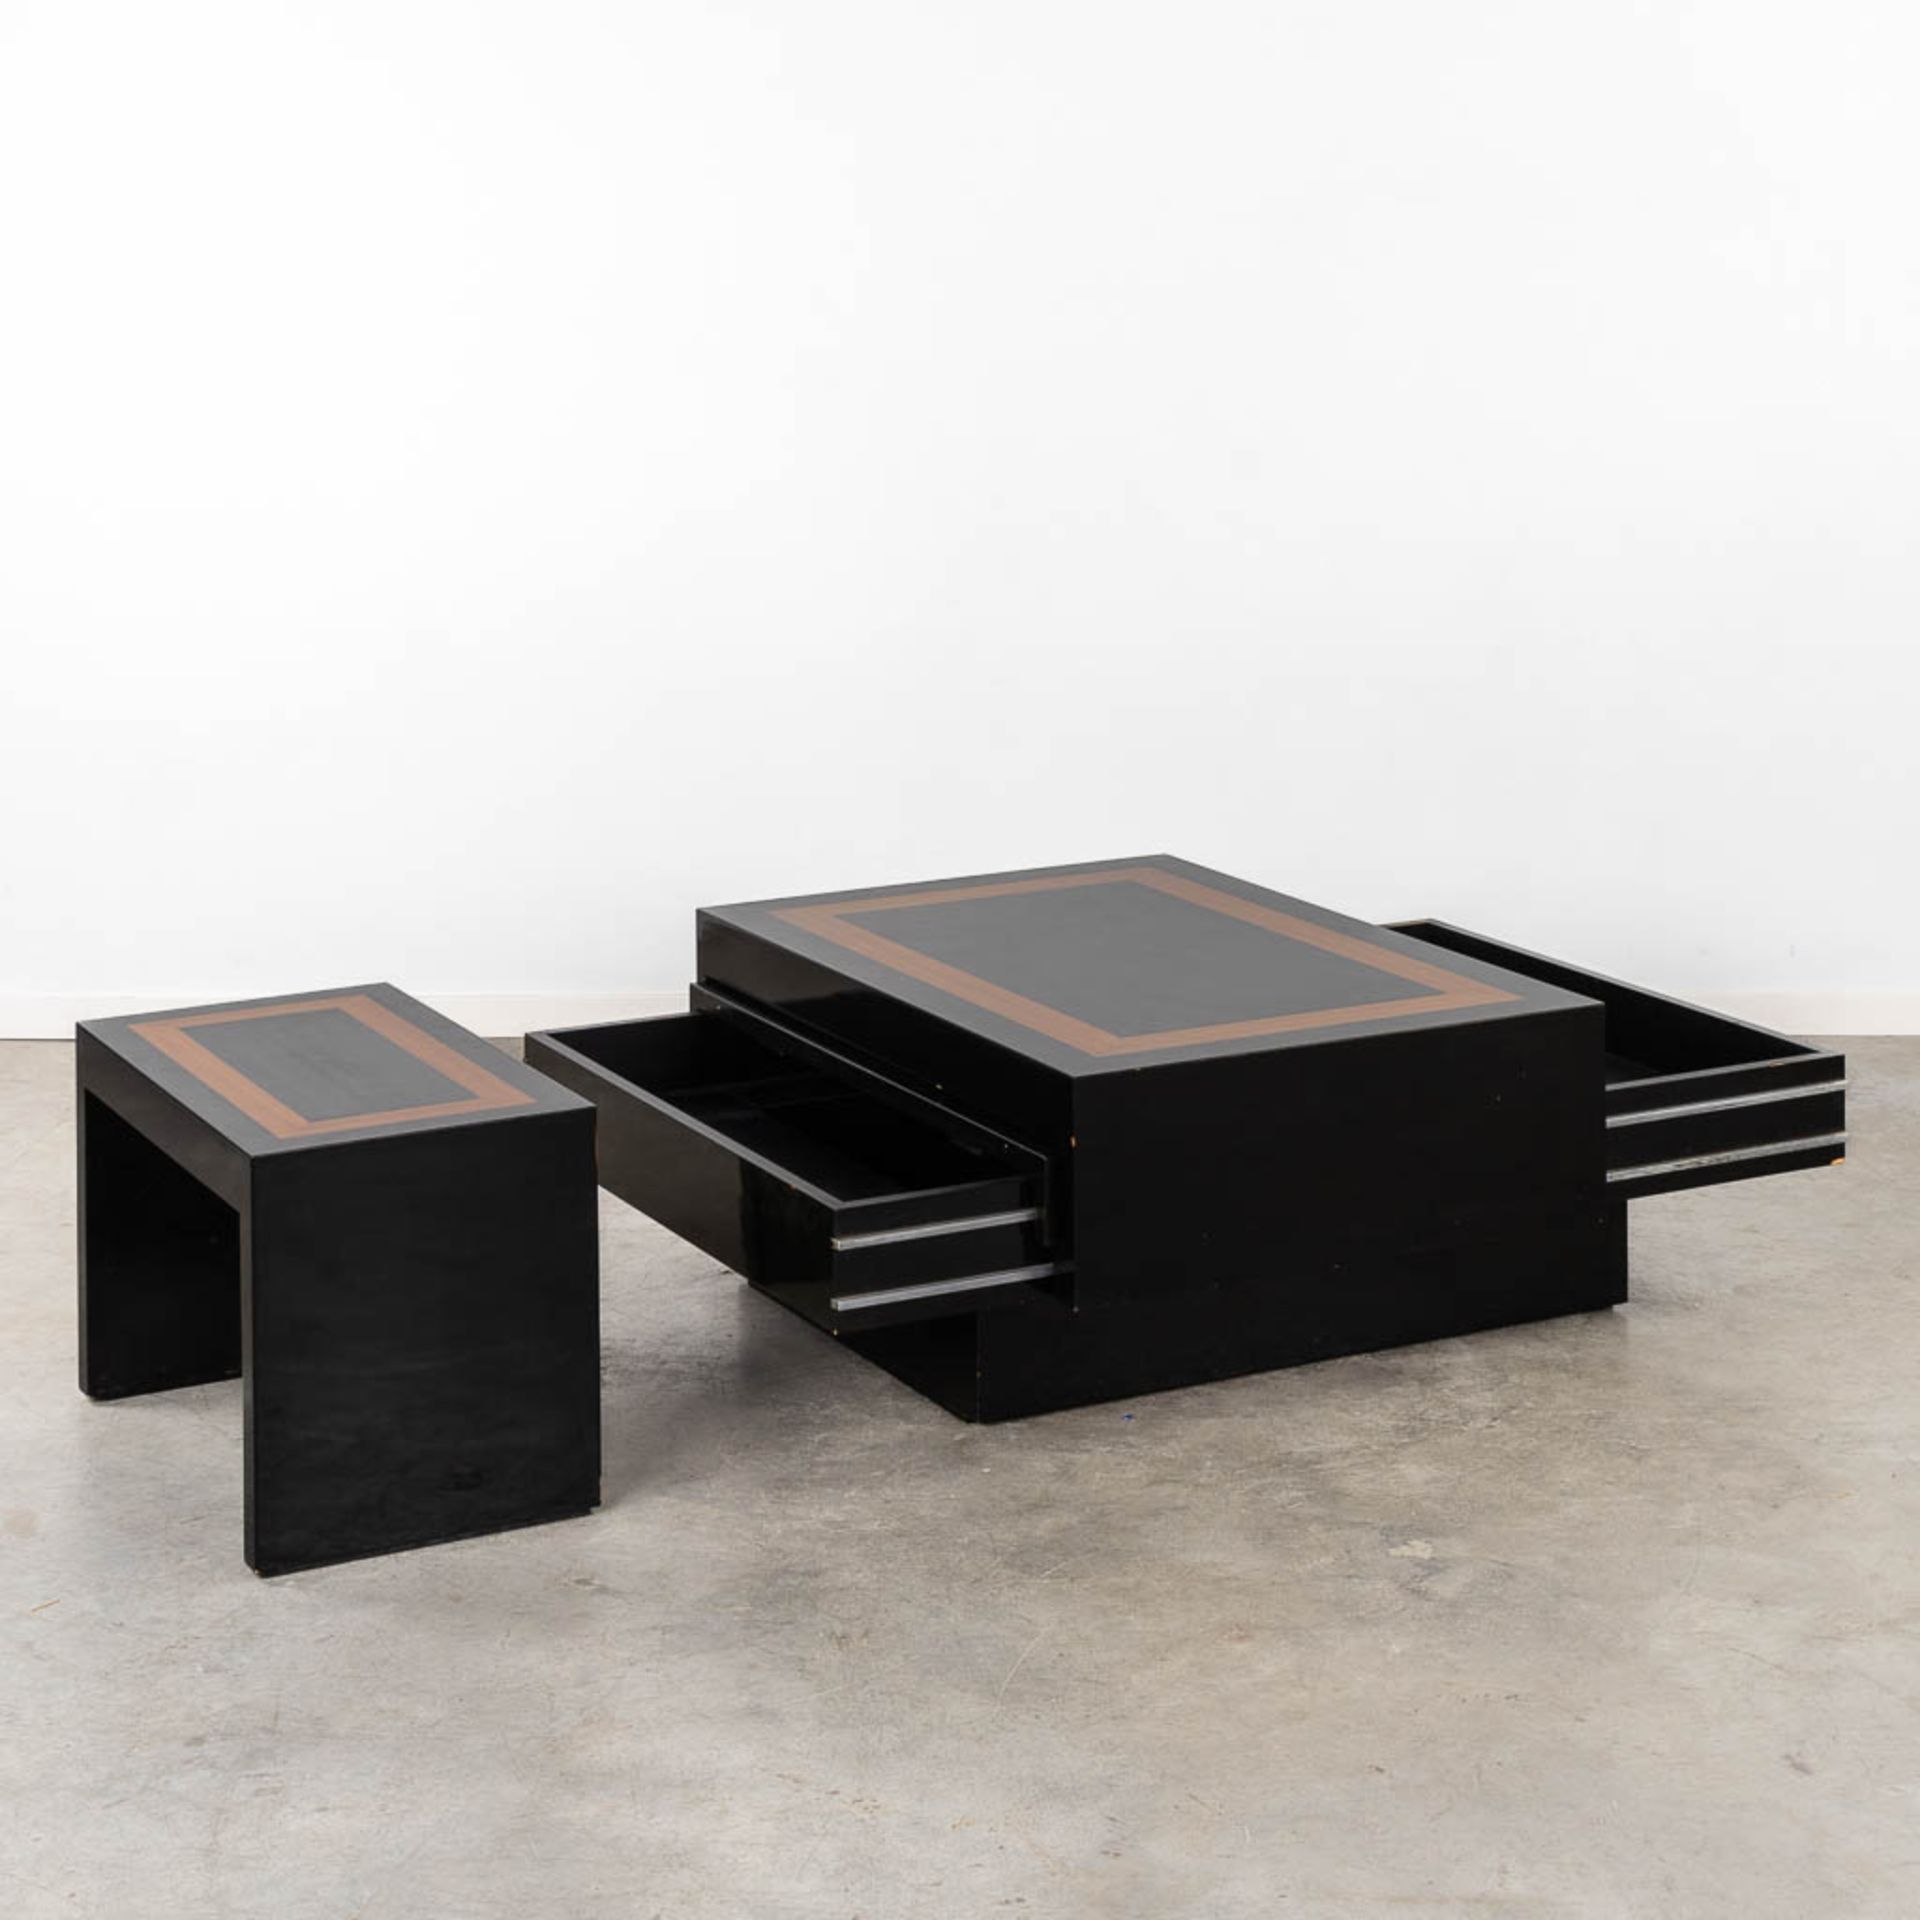 A slideable coffee table, added a bench. Lacquered wood. (L:110 x W:145 x H:47 cm) - Bild 3 aus 9